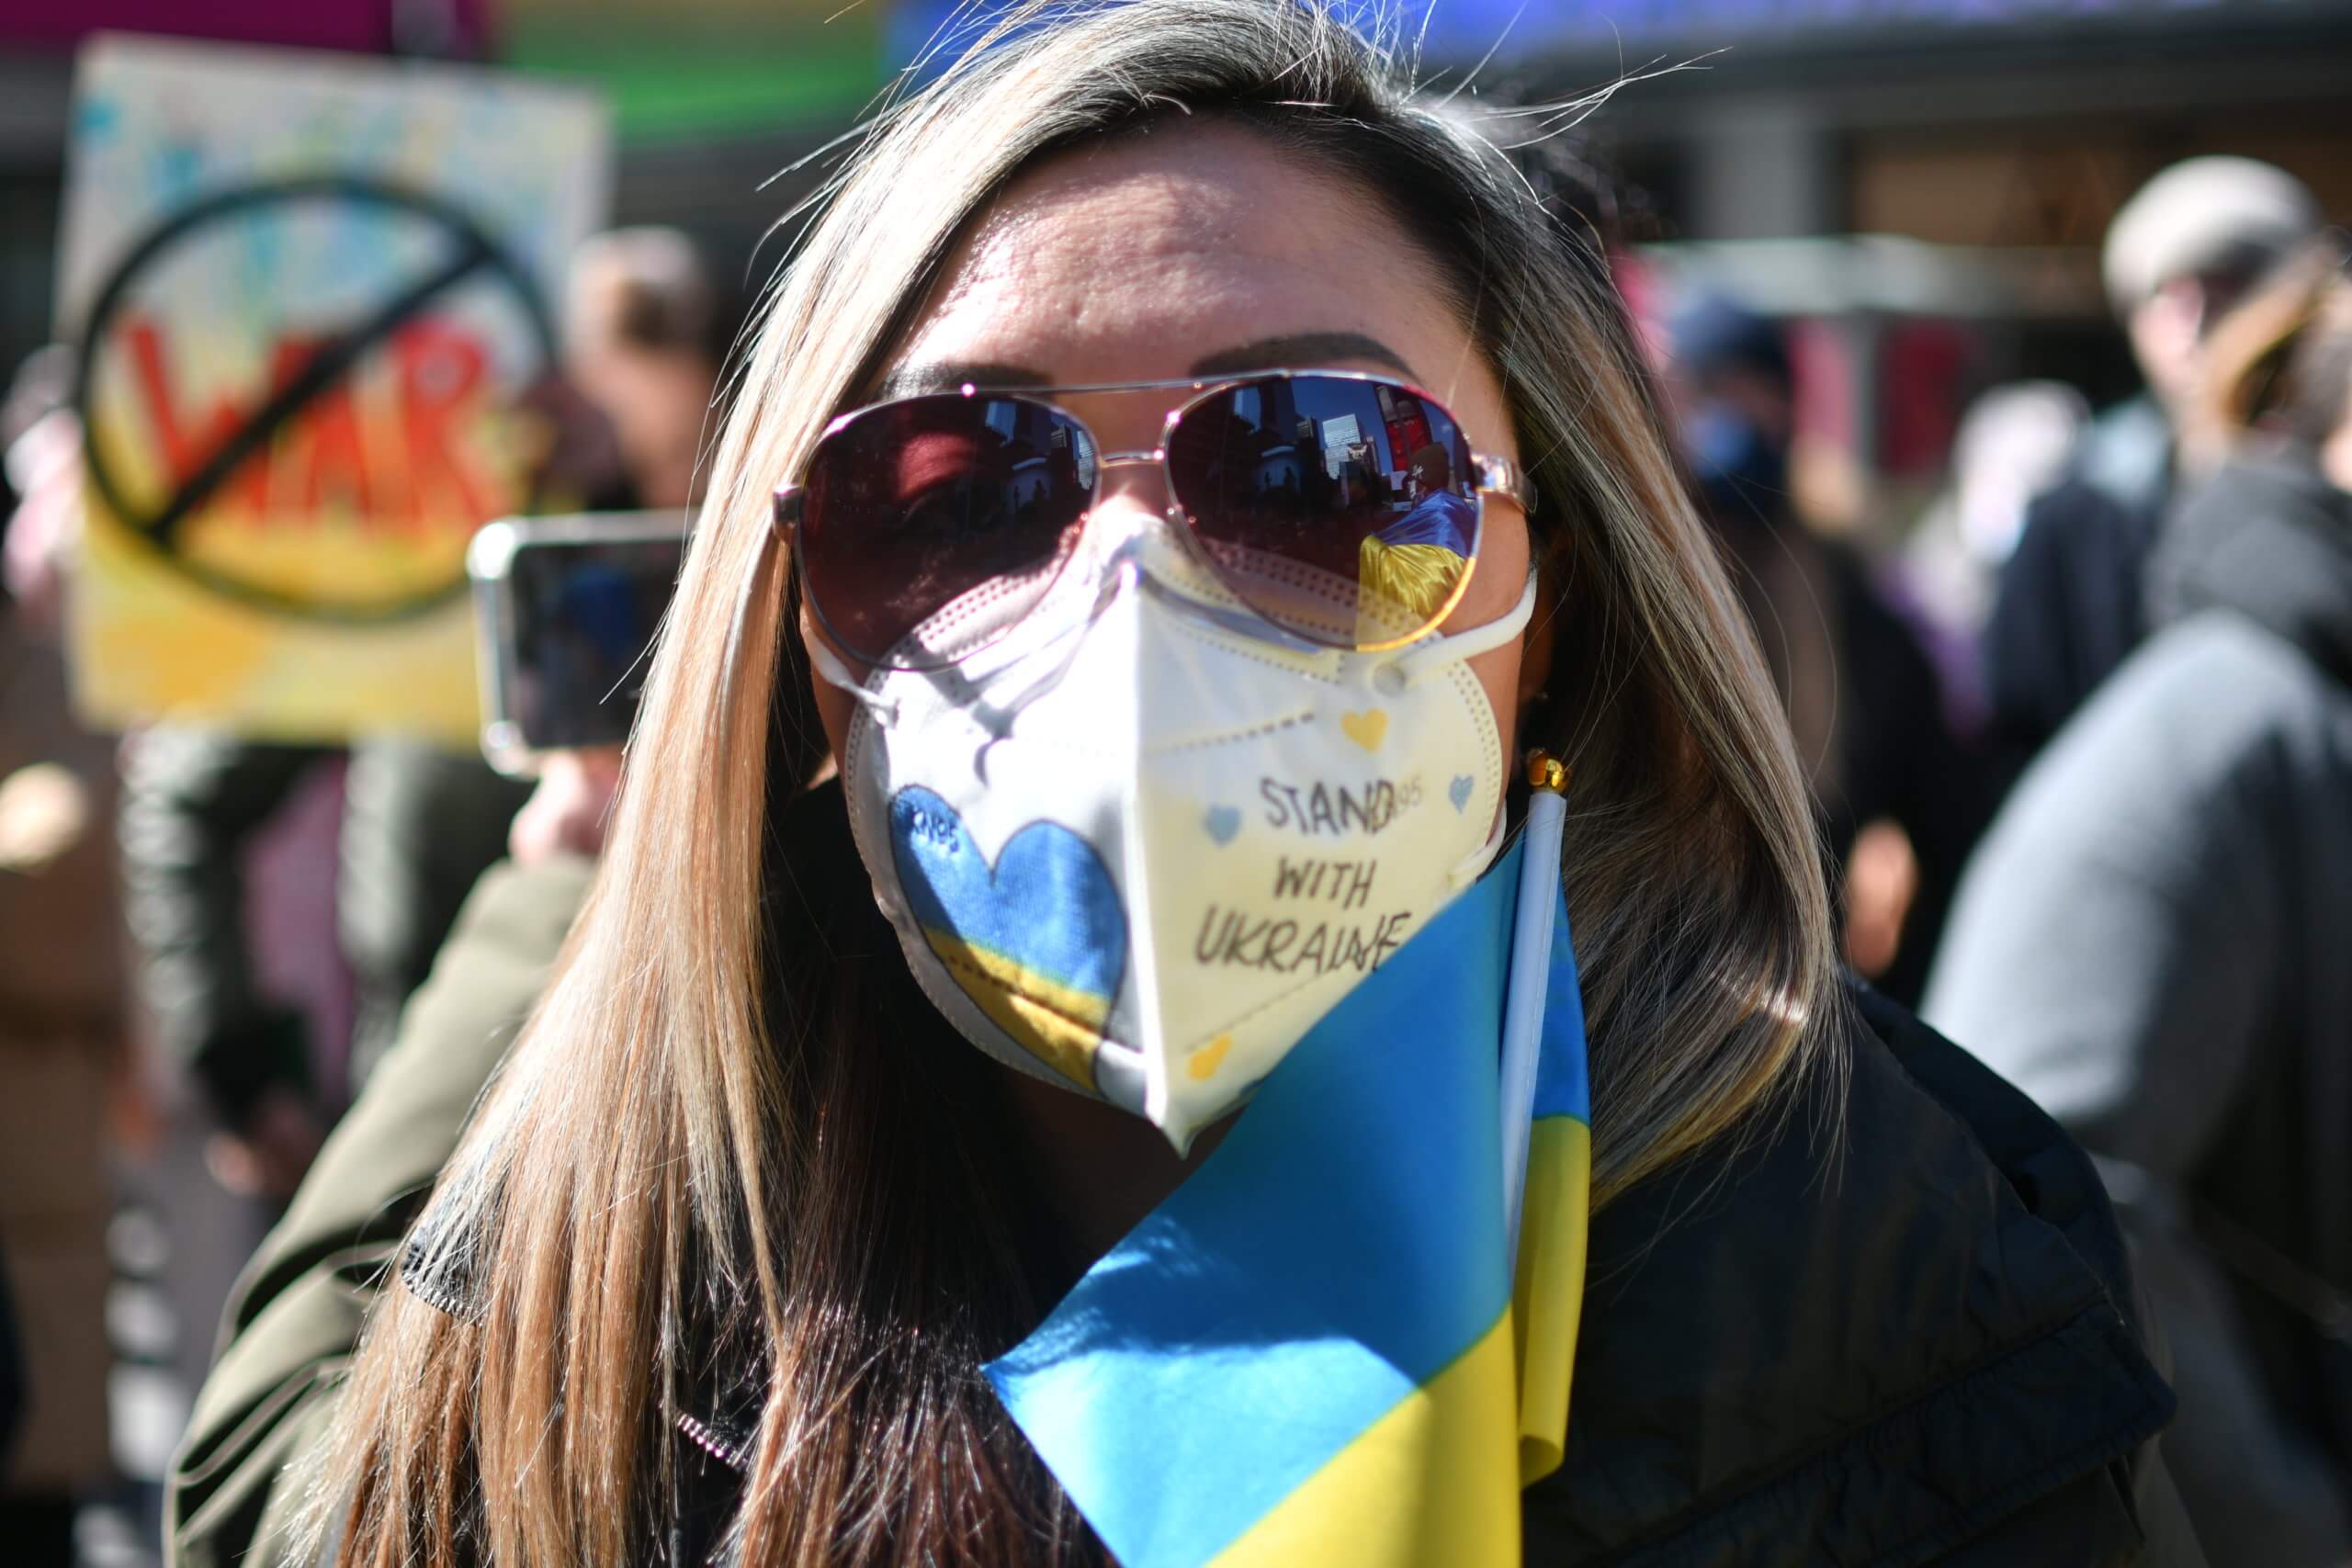 Photo Feb 26 1 09 34 PM scaled SEE IT: New York stands united with Ukraine at latest rally in Times Square